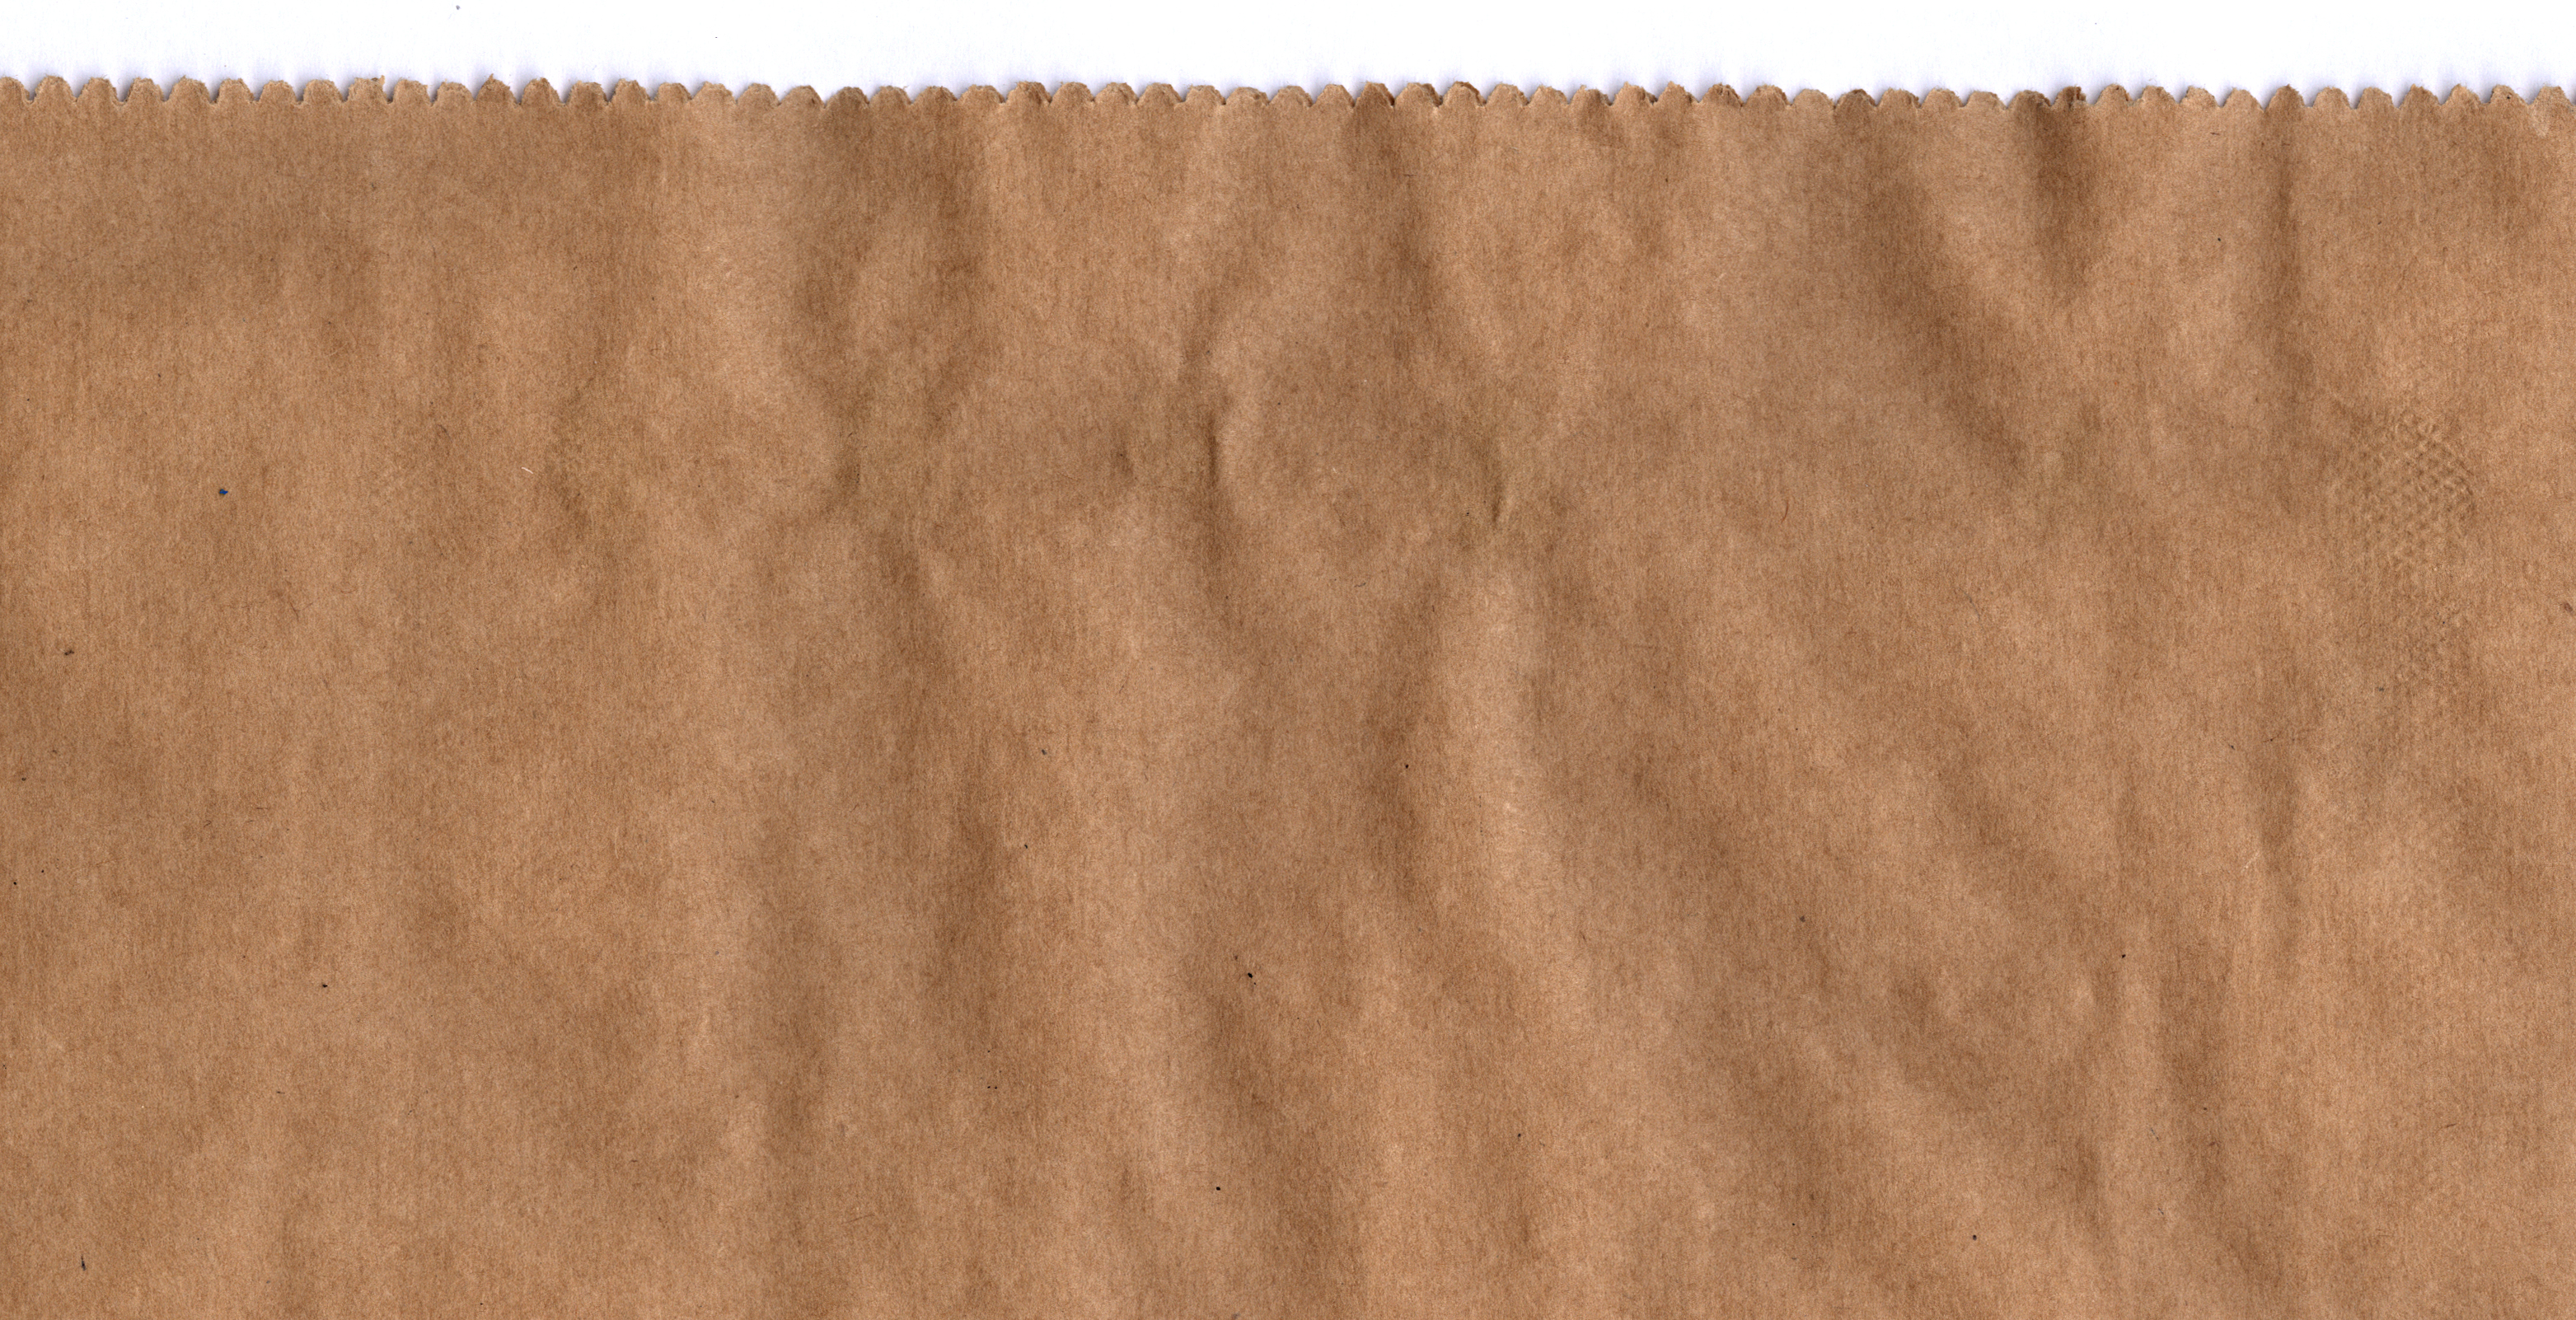 Brown-Paper-Bag | If it's there, I'll do it